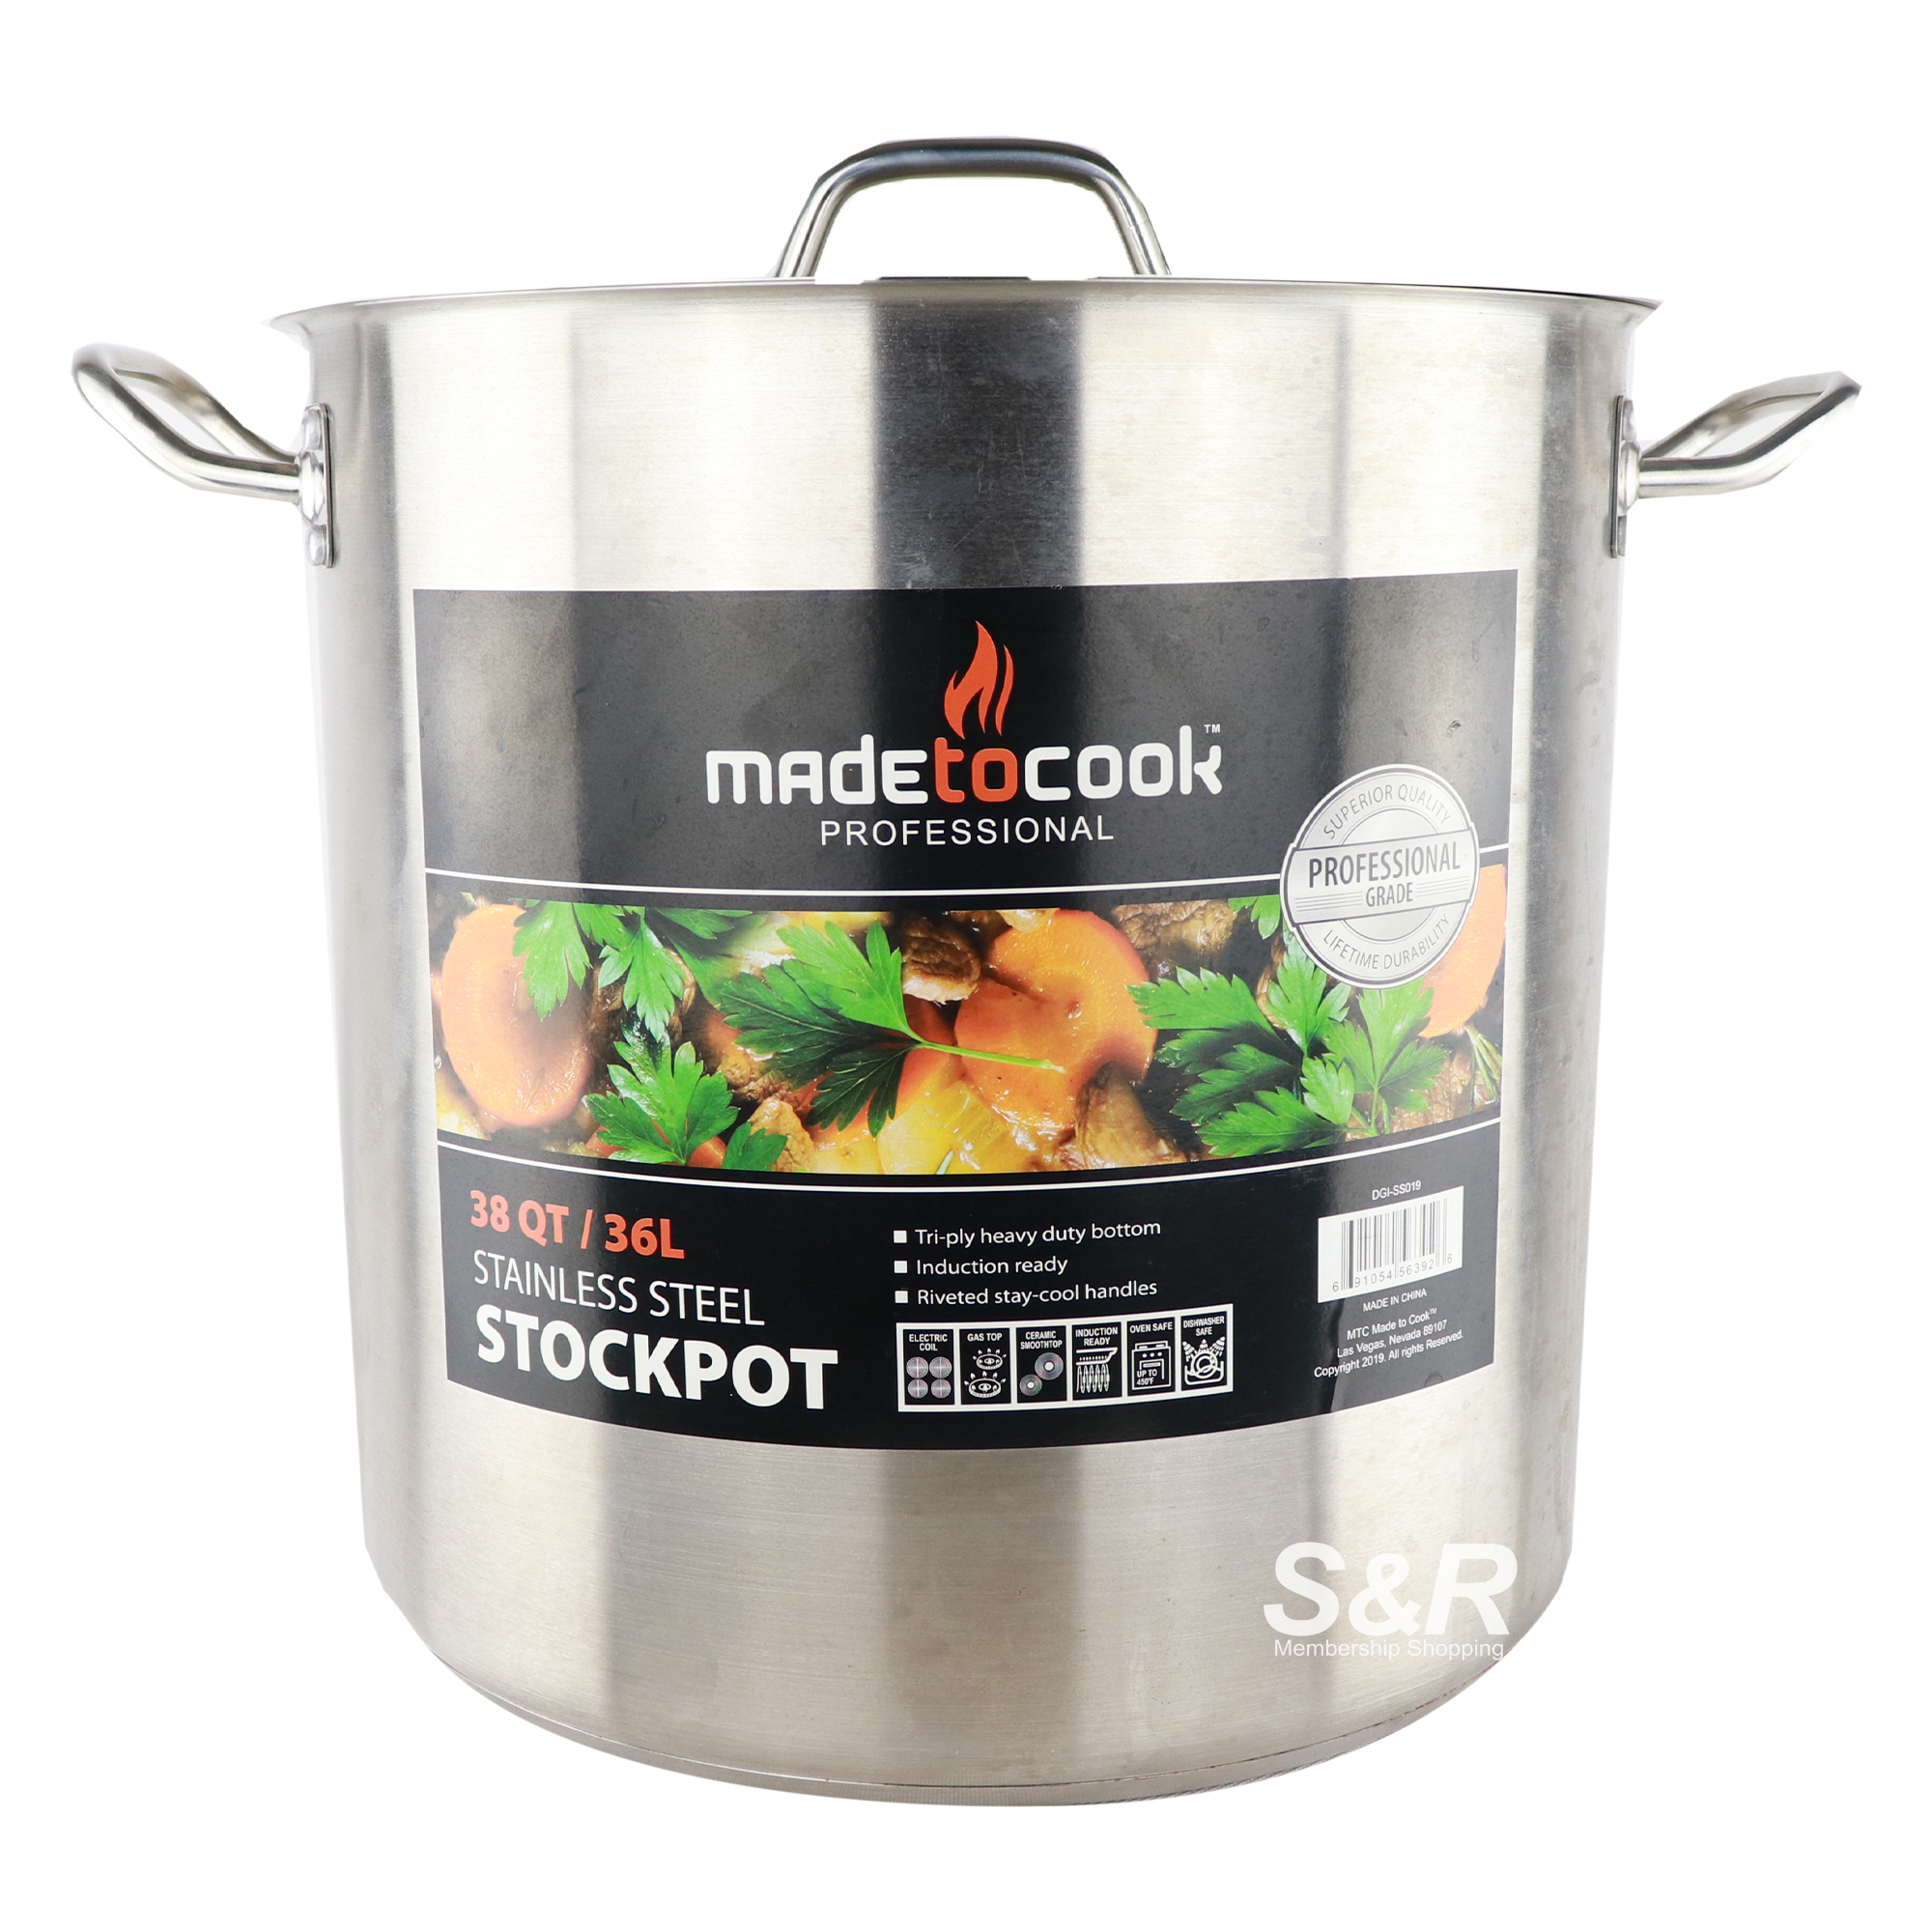 https://www.snrshopping.com/upload/product/Made%20to%20Cook%20Professional%20Stainless%20Steel%20Stockpot%201pc-2460/Made%20to%20Cook%20Professional%20Stainless%20Steel%20Stockpot%201pc-x4FAHtxOoq.jpg